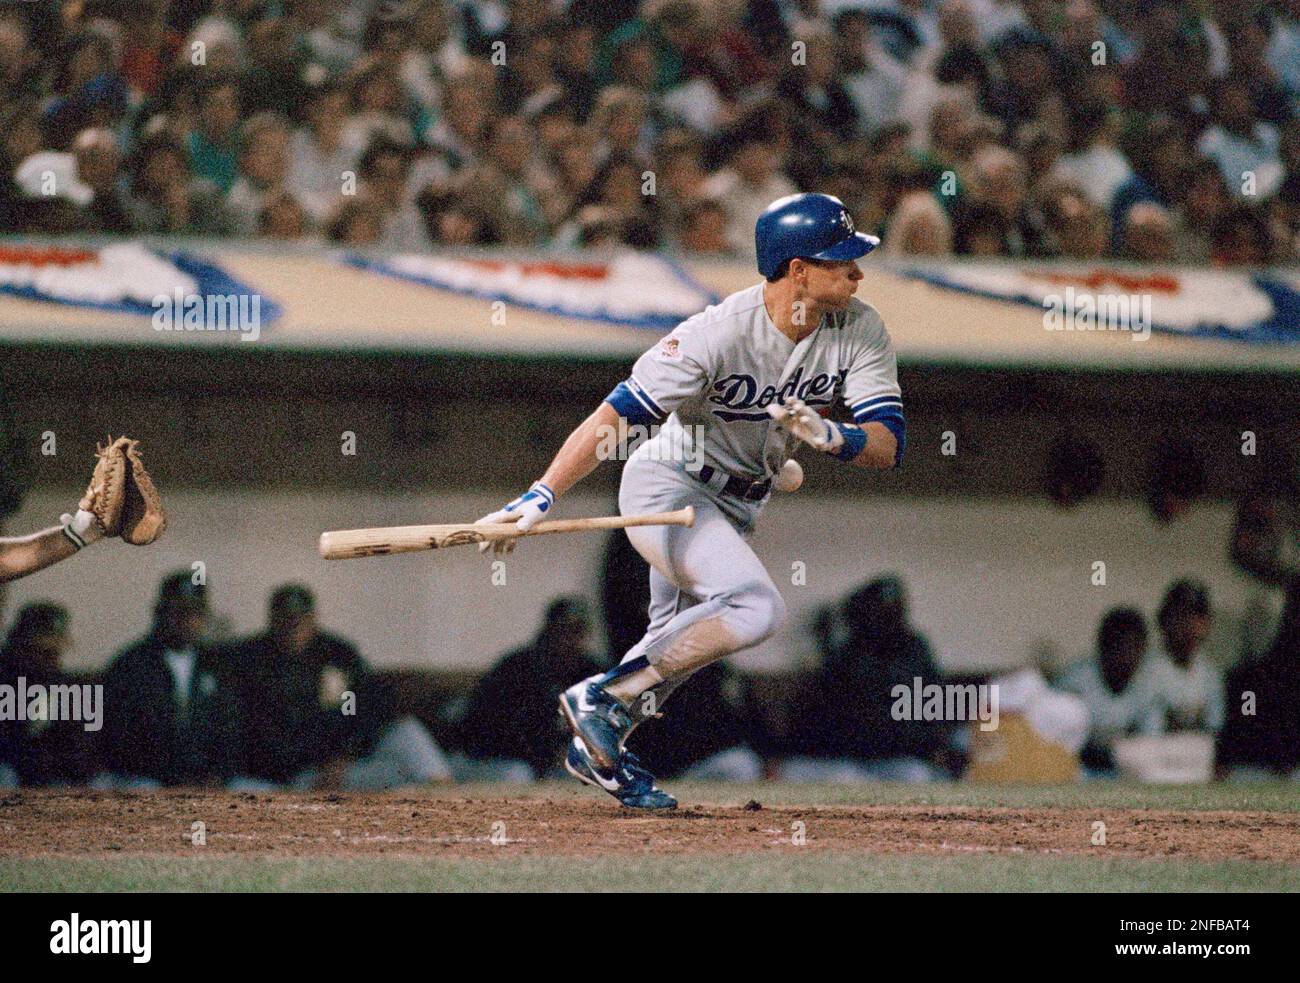 Los Angeles Dodgers Steve Sax is touched by the ball for an out as